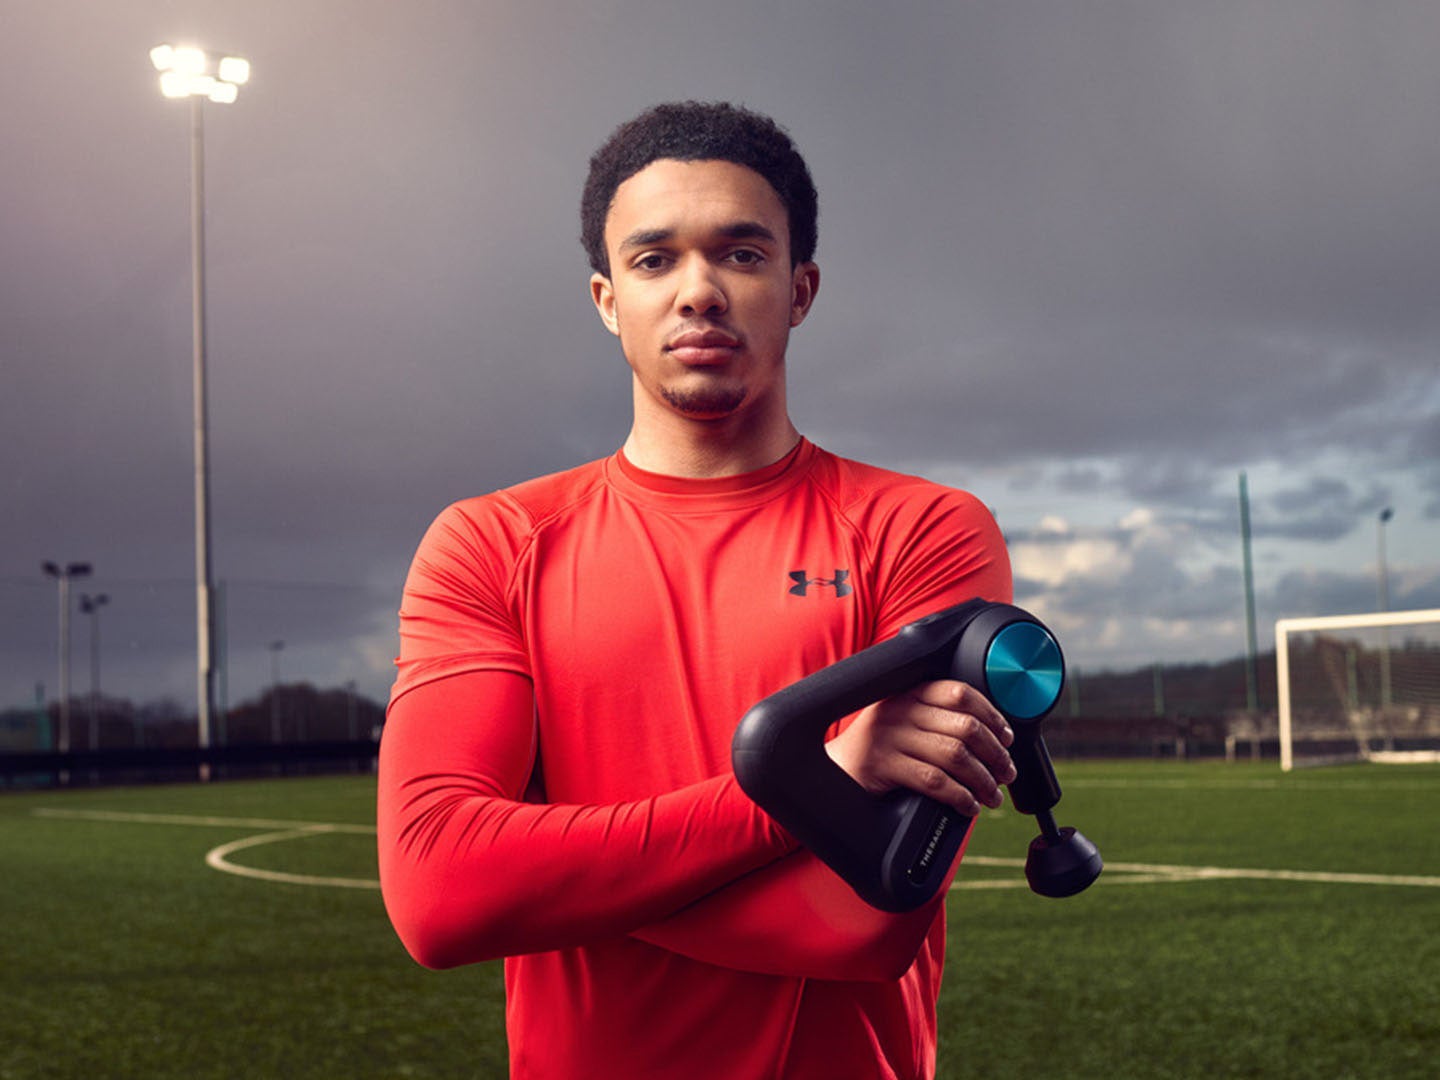 We reviewed two versions of the percussive massager that’s loved by the Premier League player